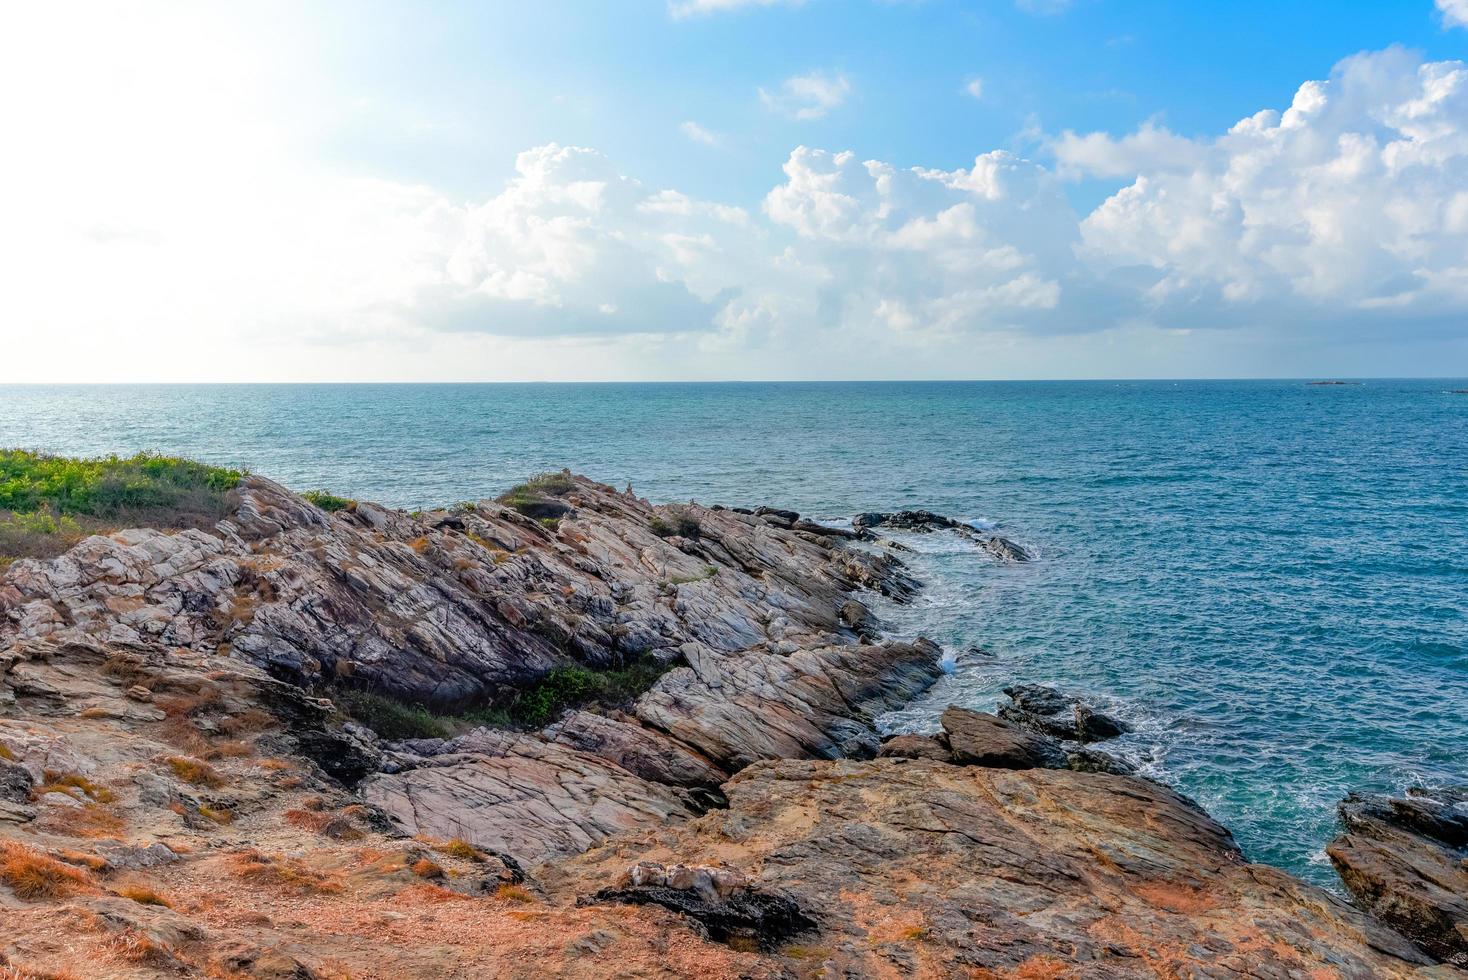 View of sea waves and fantastic rocky coast landscape - Seascape rock tropical island with ocean and blue sky background in Thailand photo